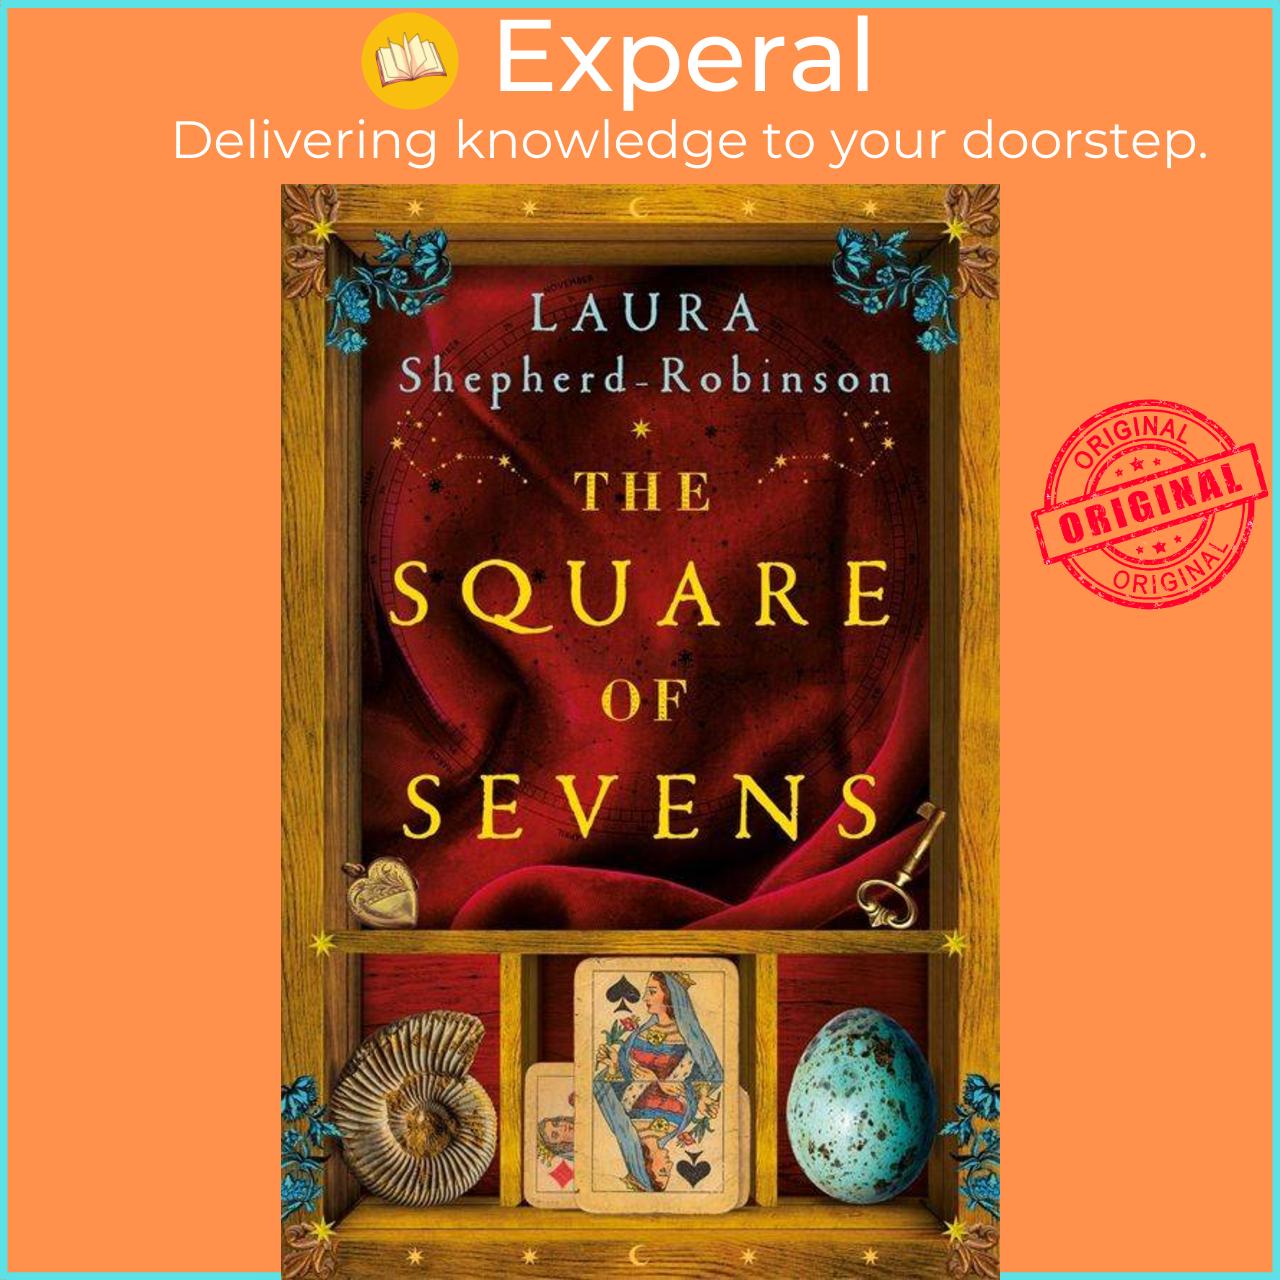 Hình ảnh Sách - The Square of Sevens - the stunning, must-read historical nove by Laura Shepherd-Robinson (UK edition, hardcover)